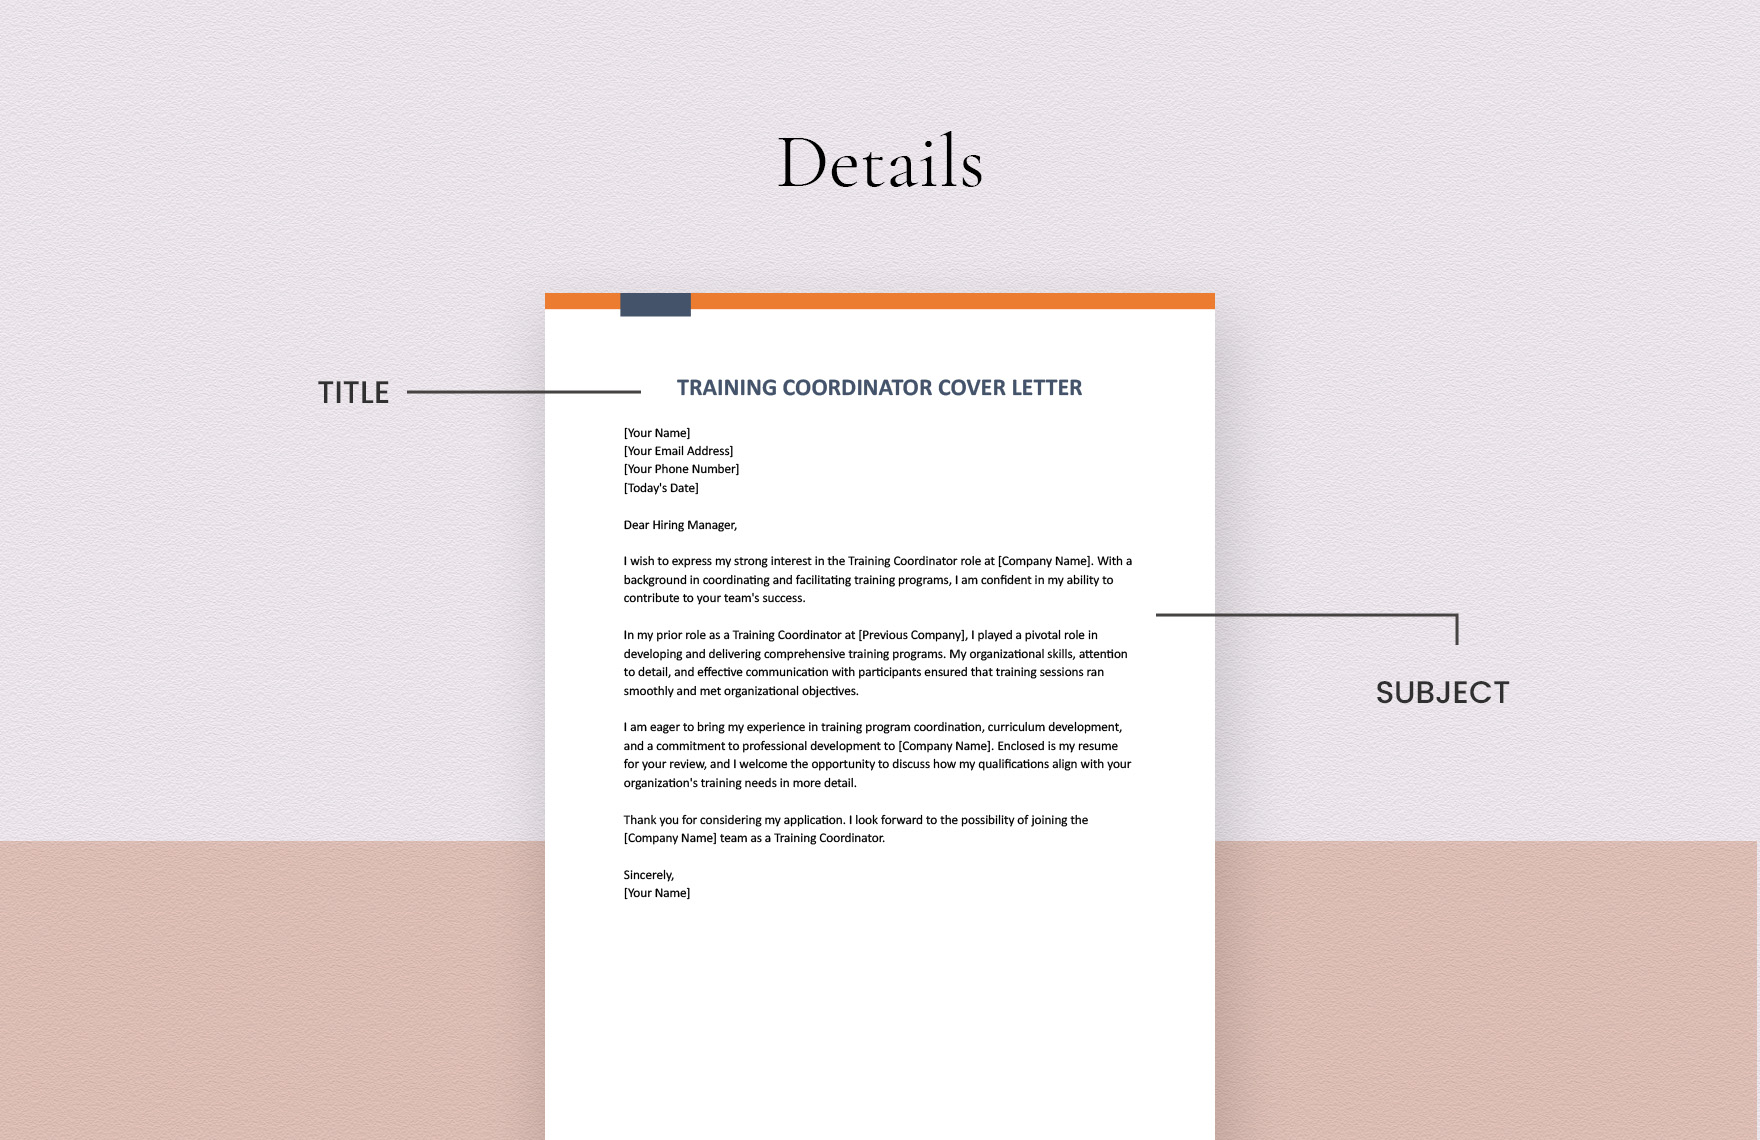 Training Coordinator Cover Letter